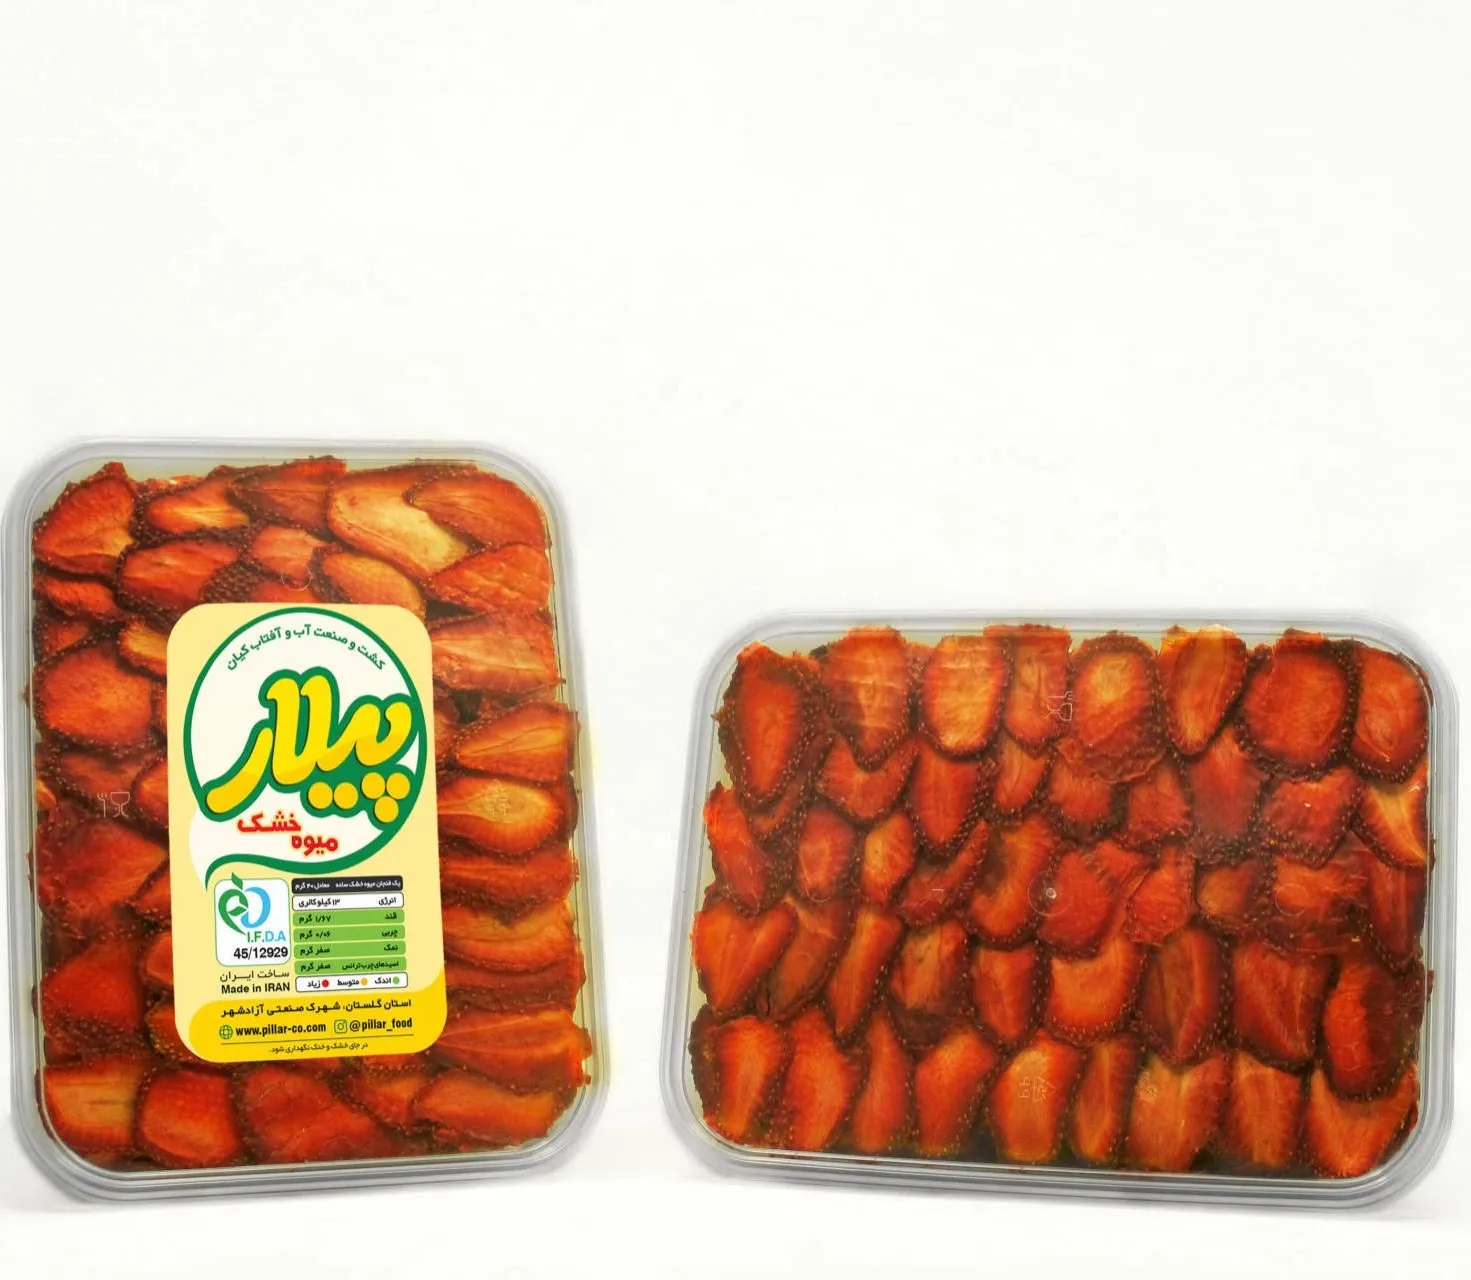 Purchase and price of almond dry fruits types